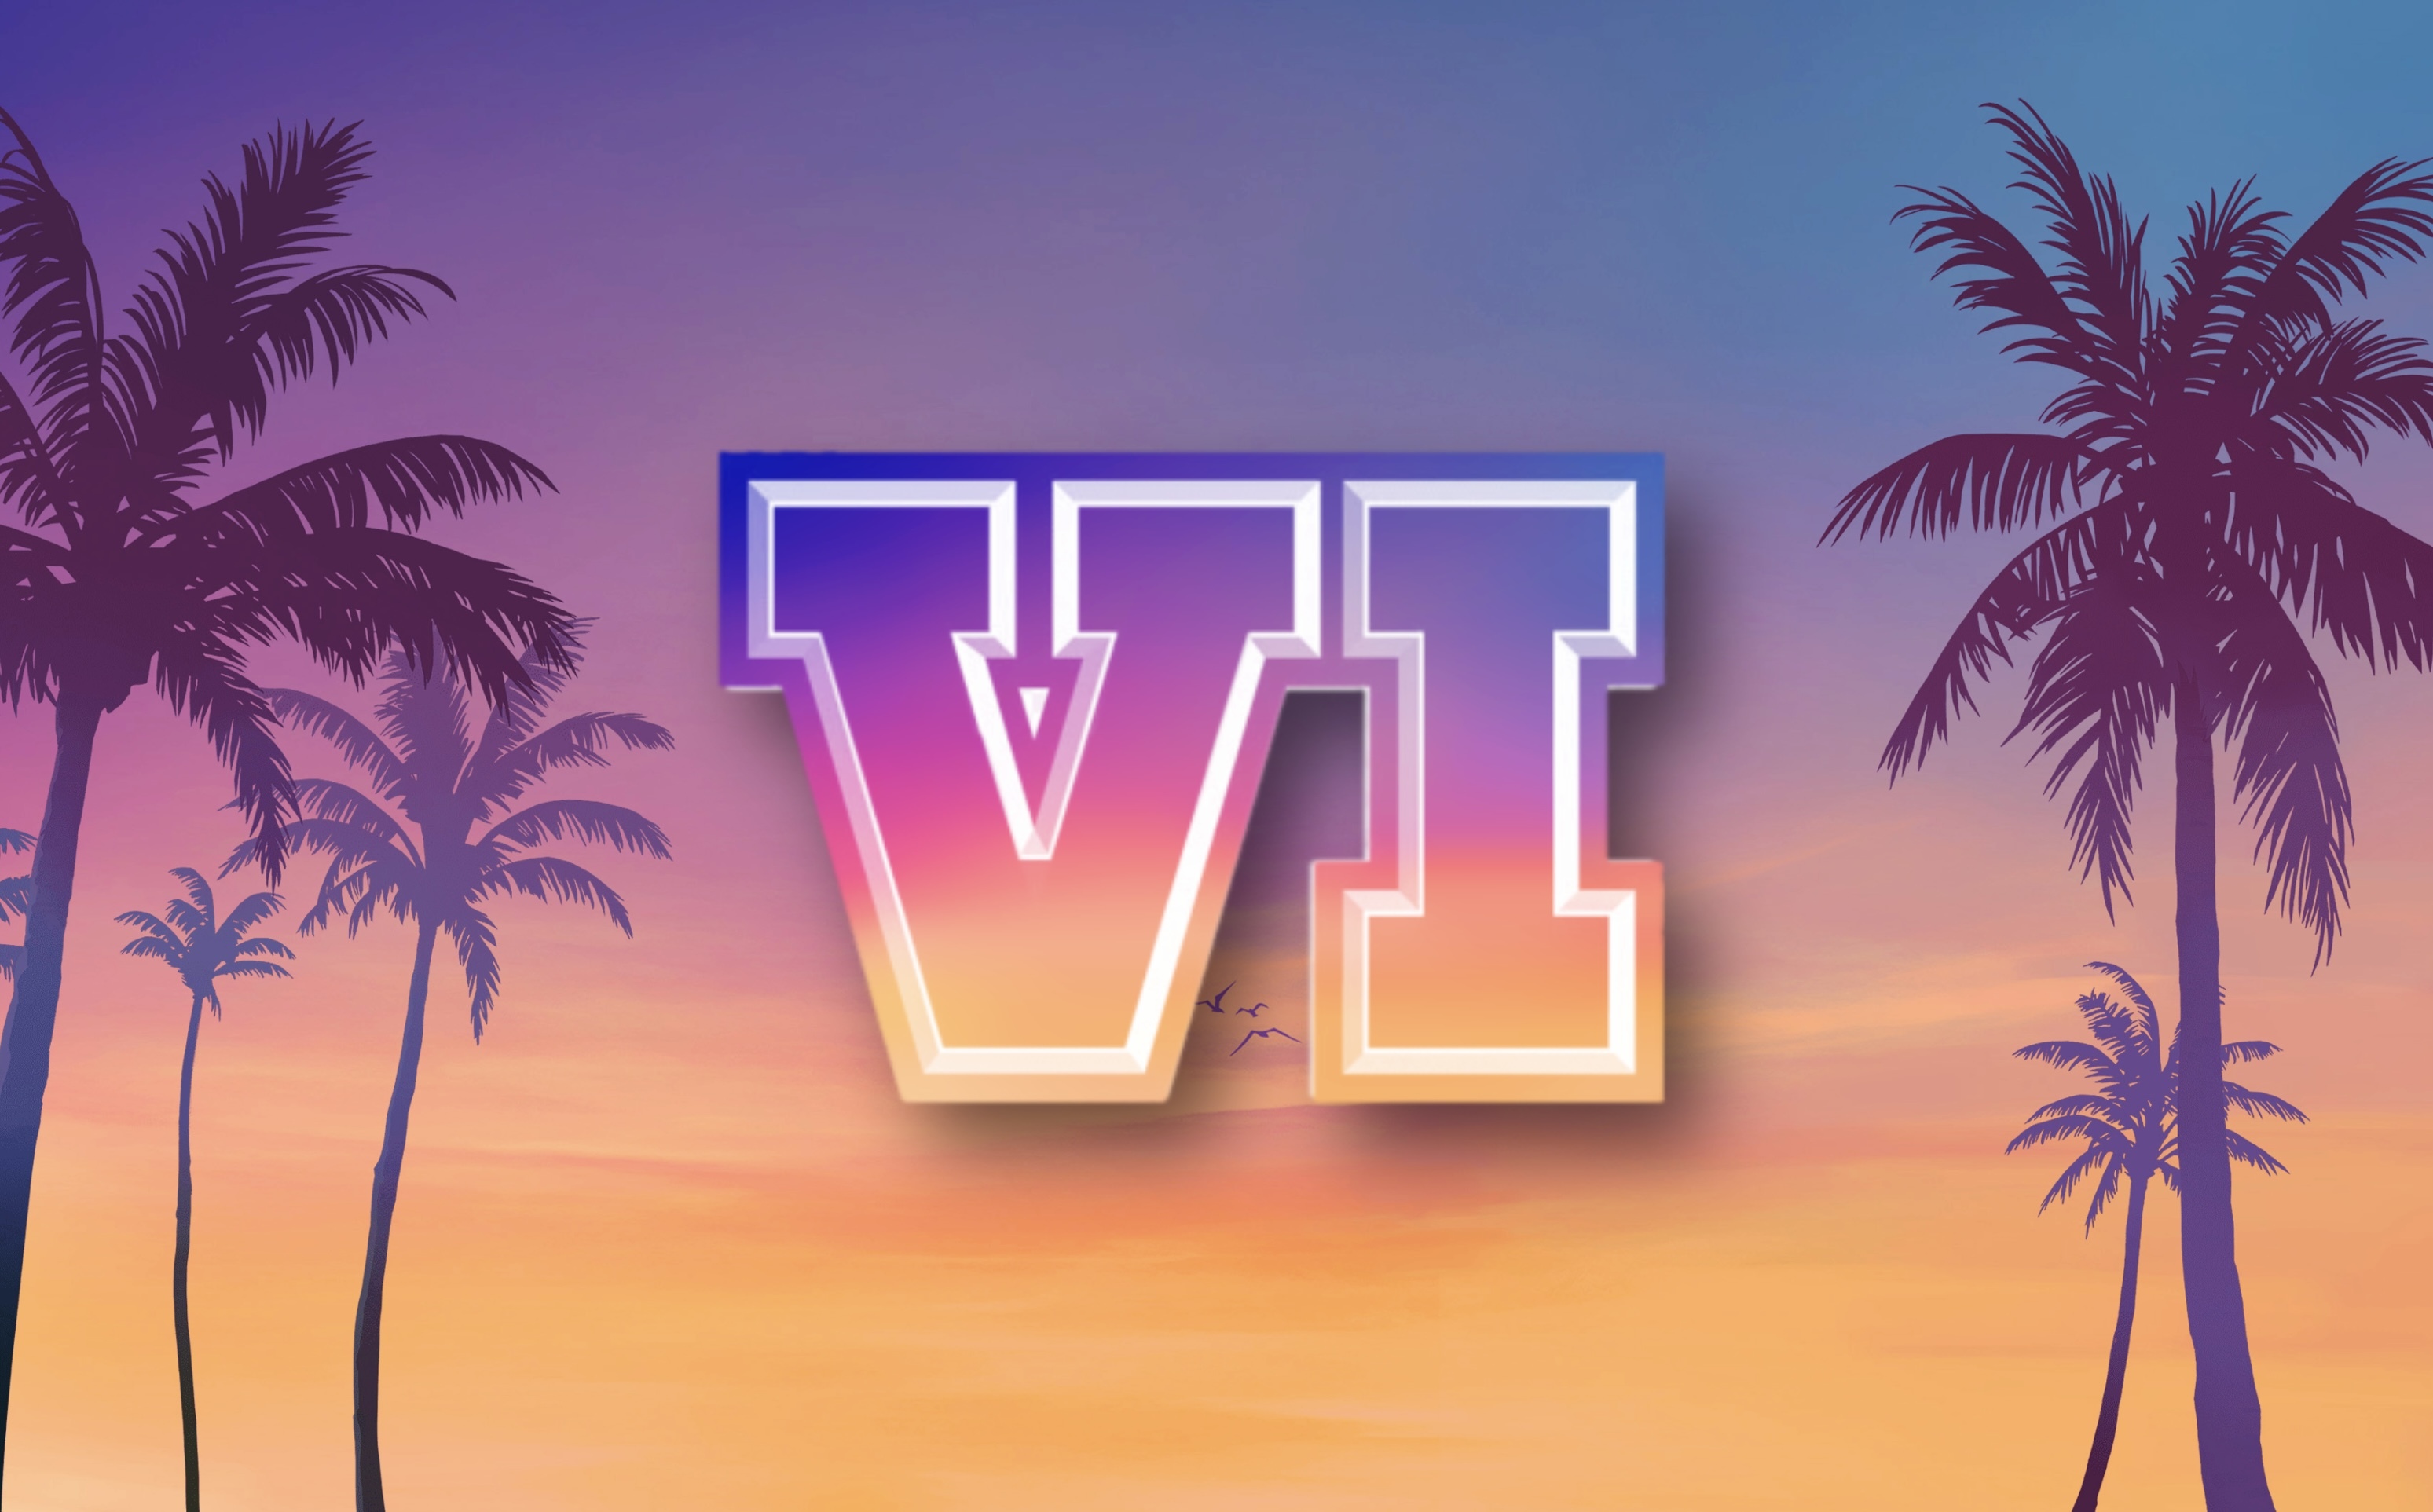 GTA 6 map leak reveals massive size of Vice City compared to Los